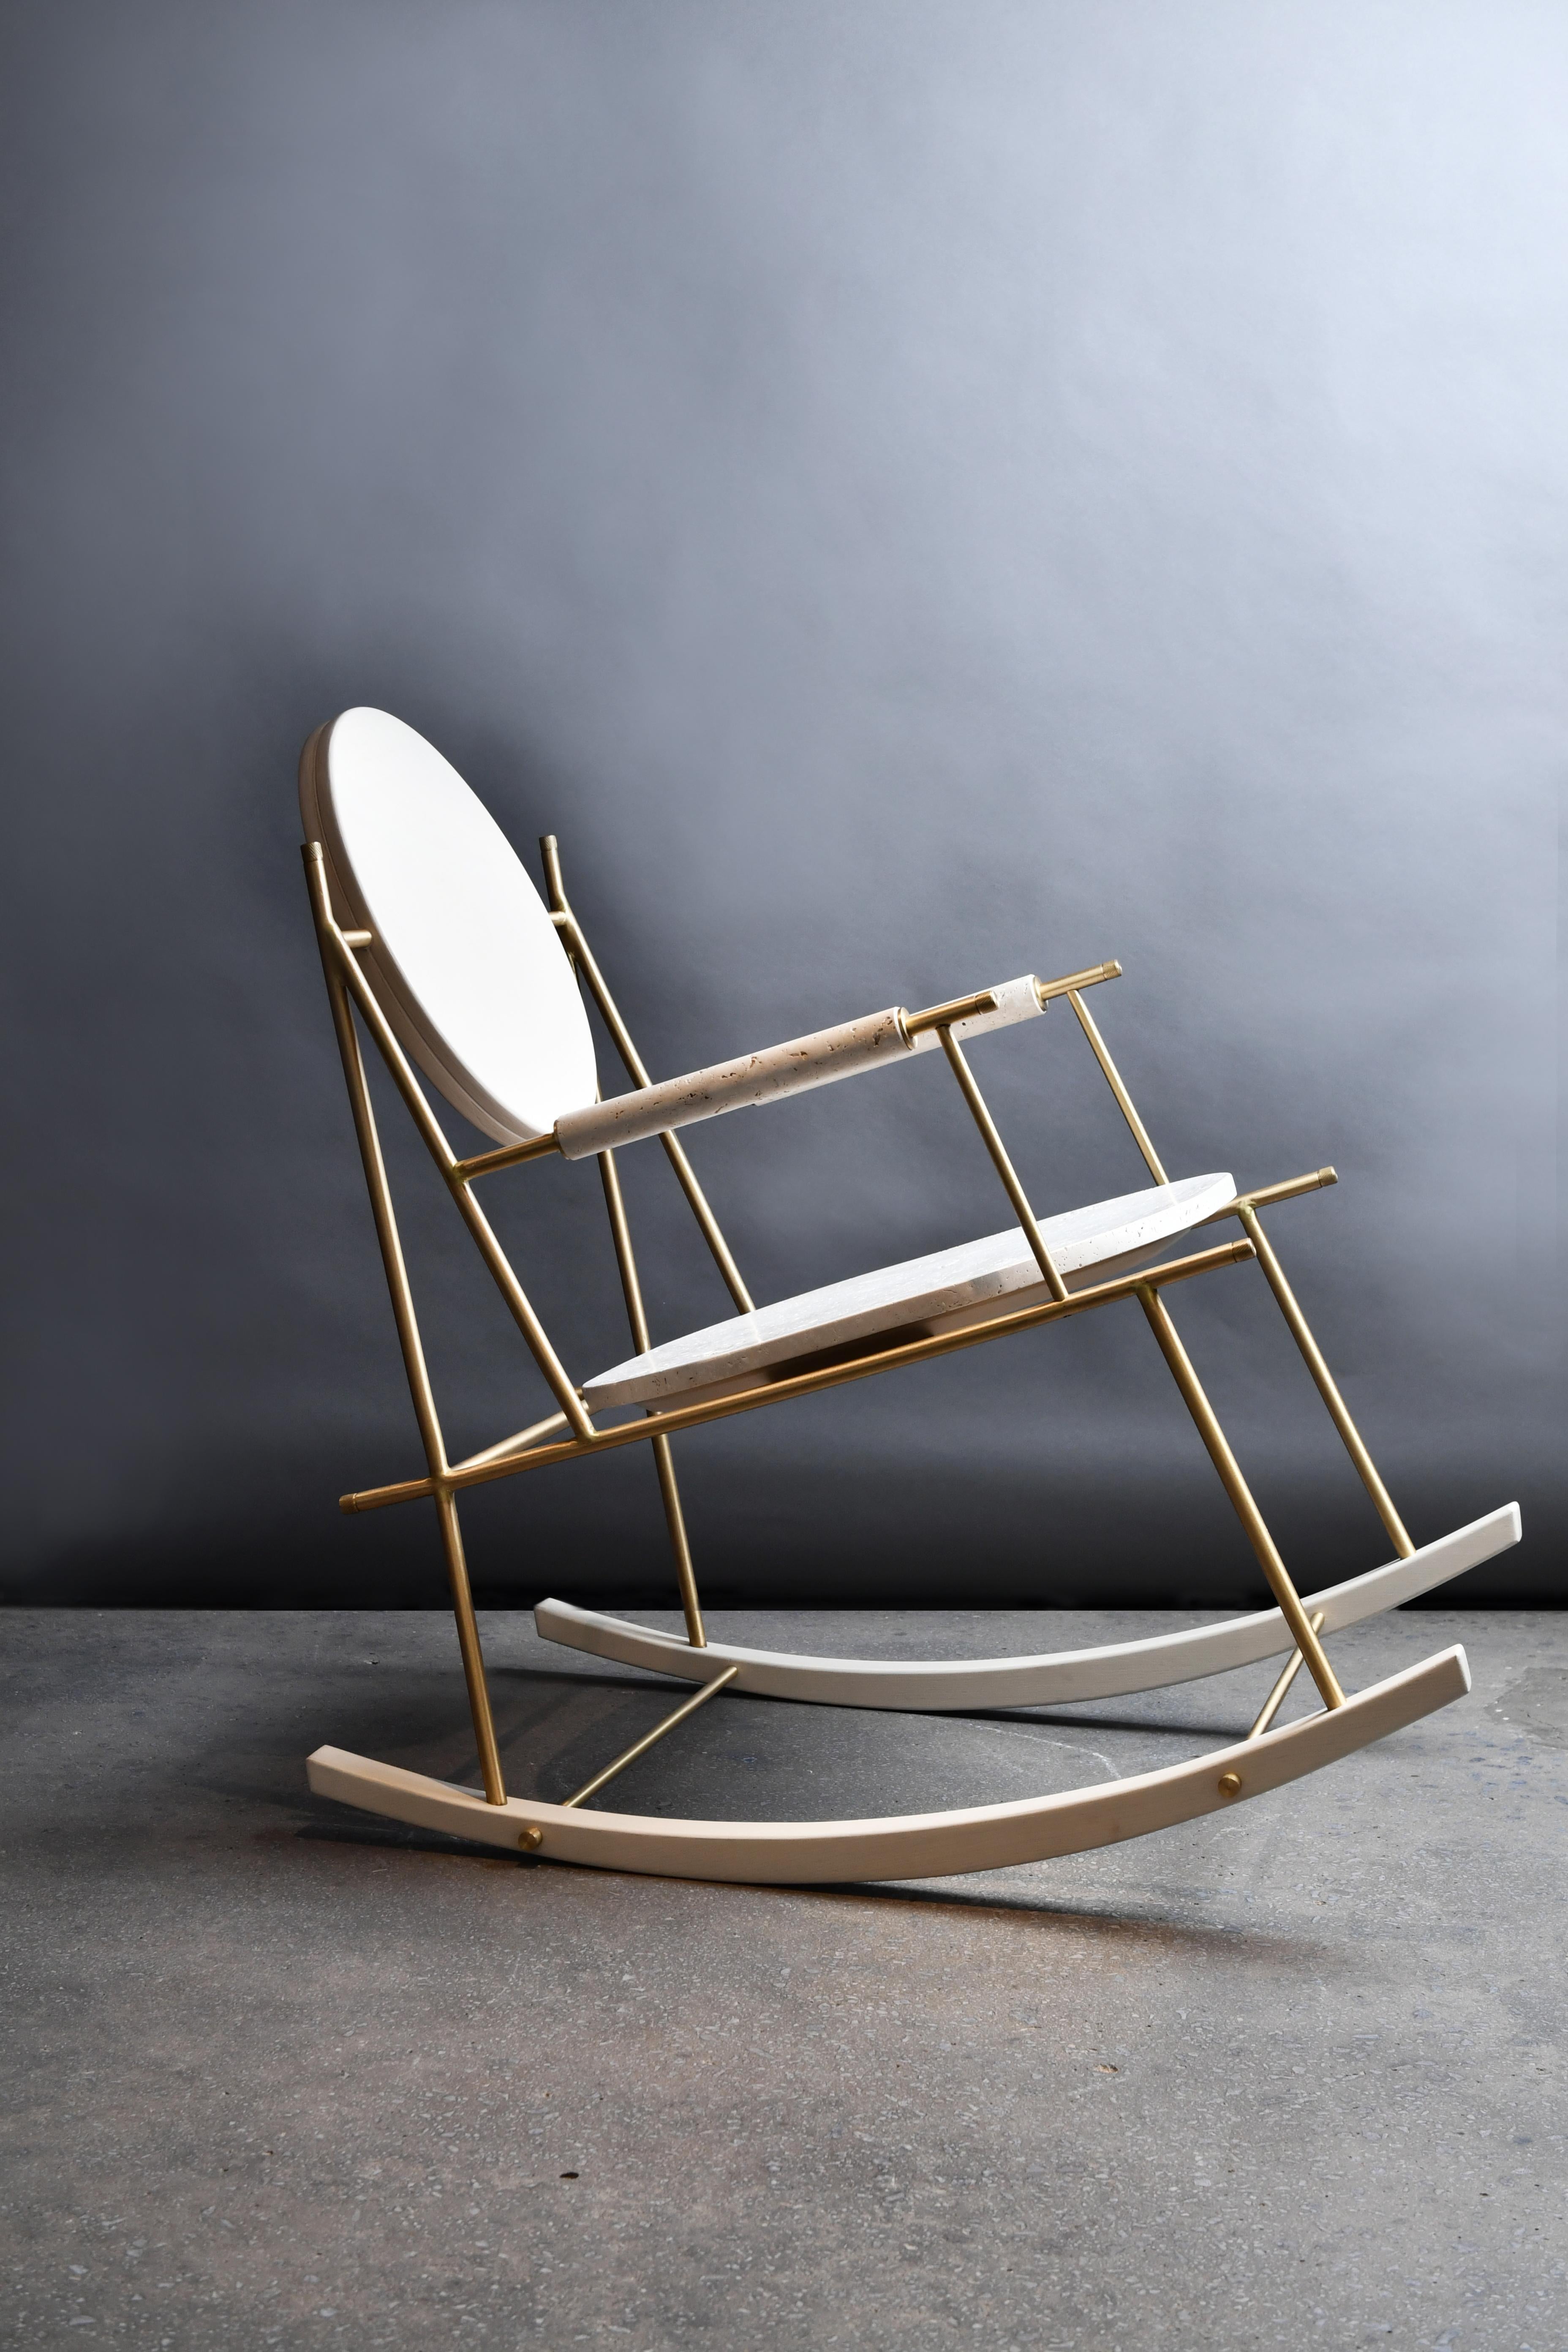 Travertino nostalgia rocking chair by Saccal Design House
Dimensions: L 51 x D 93 x H 88 cm
Materials: Travertino navona, oakwood, brass 

Saccal Design House, located in Beirut Lebanon, was founded in 2014 by two sisters Nour and Maysa